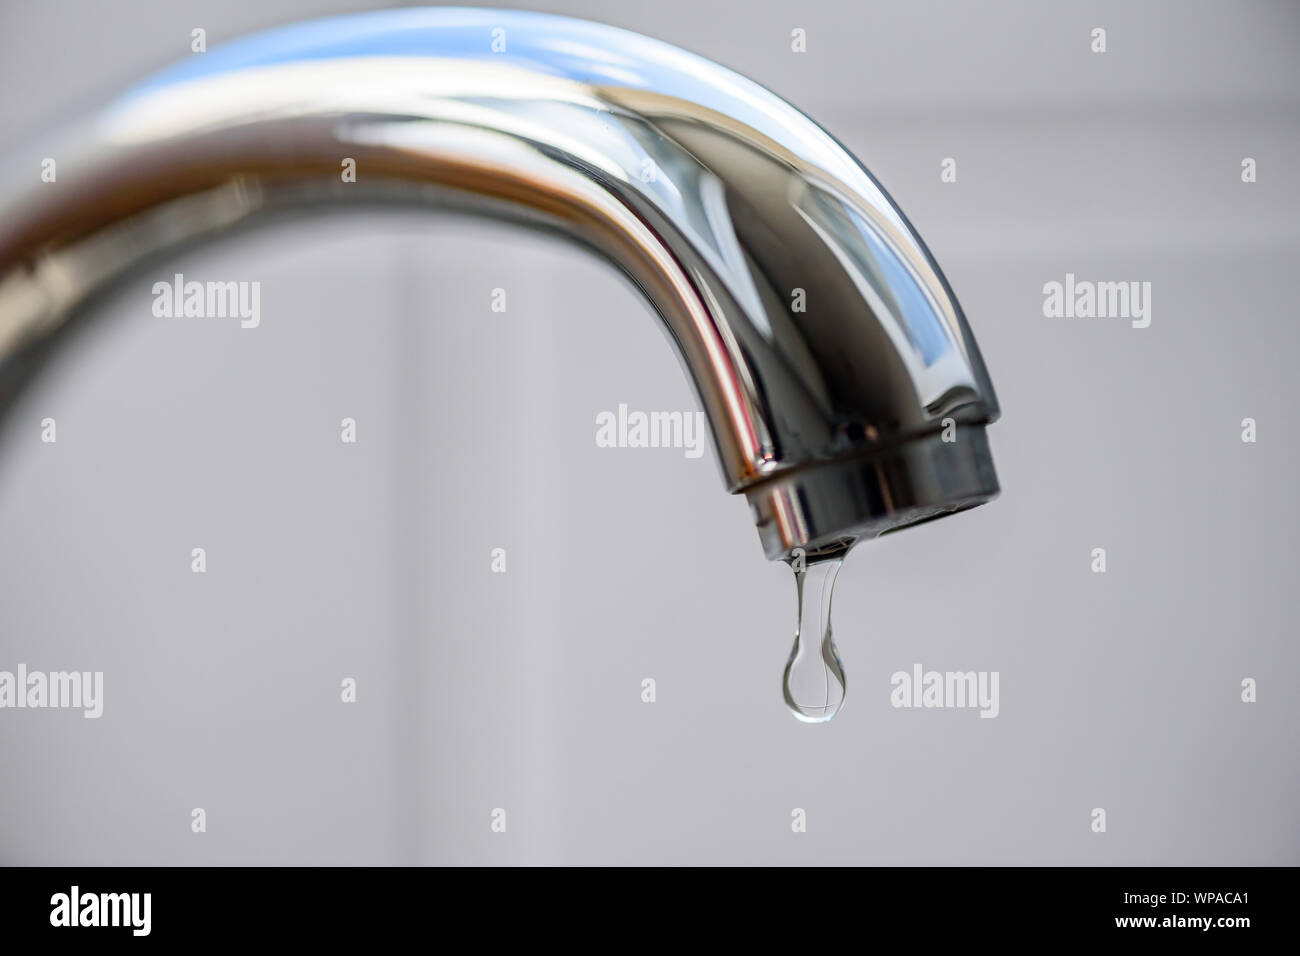 Clean water drop falling from a dripping kitchen faucet, an unnecessary waste of water in a world threatened by water scarcity. Stock Photo